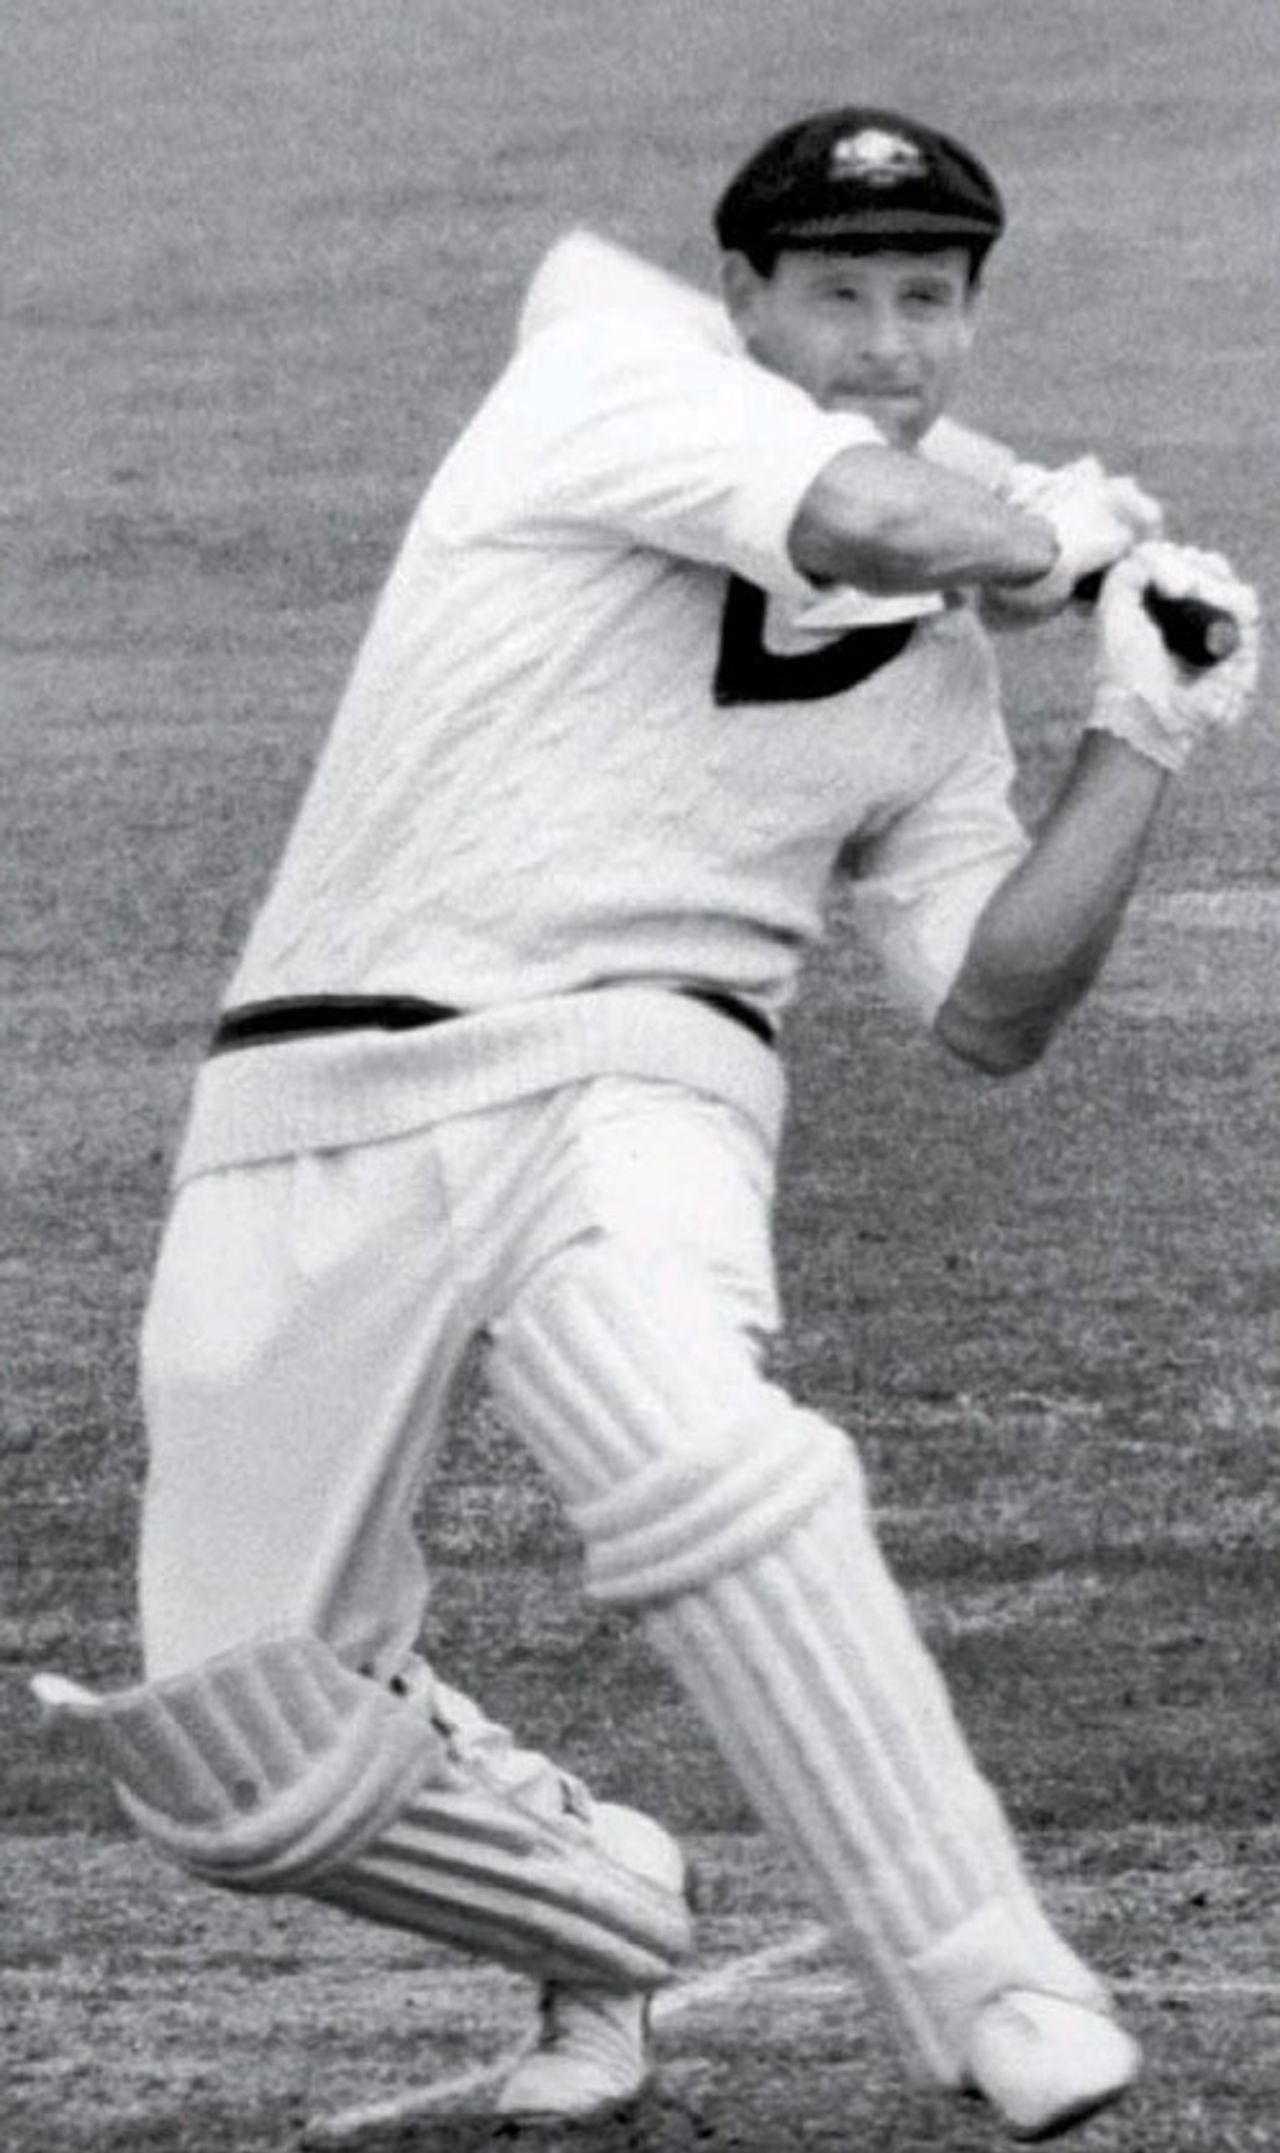 Norm O'Neill on the attack during the 1964 Ashes, July 11, 1964